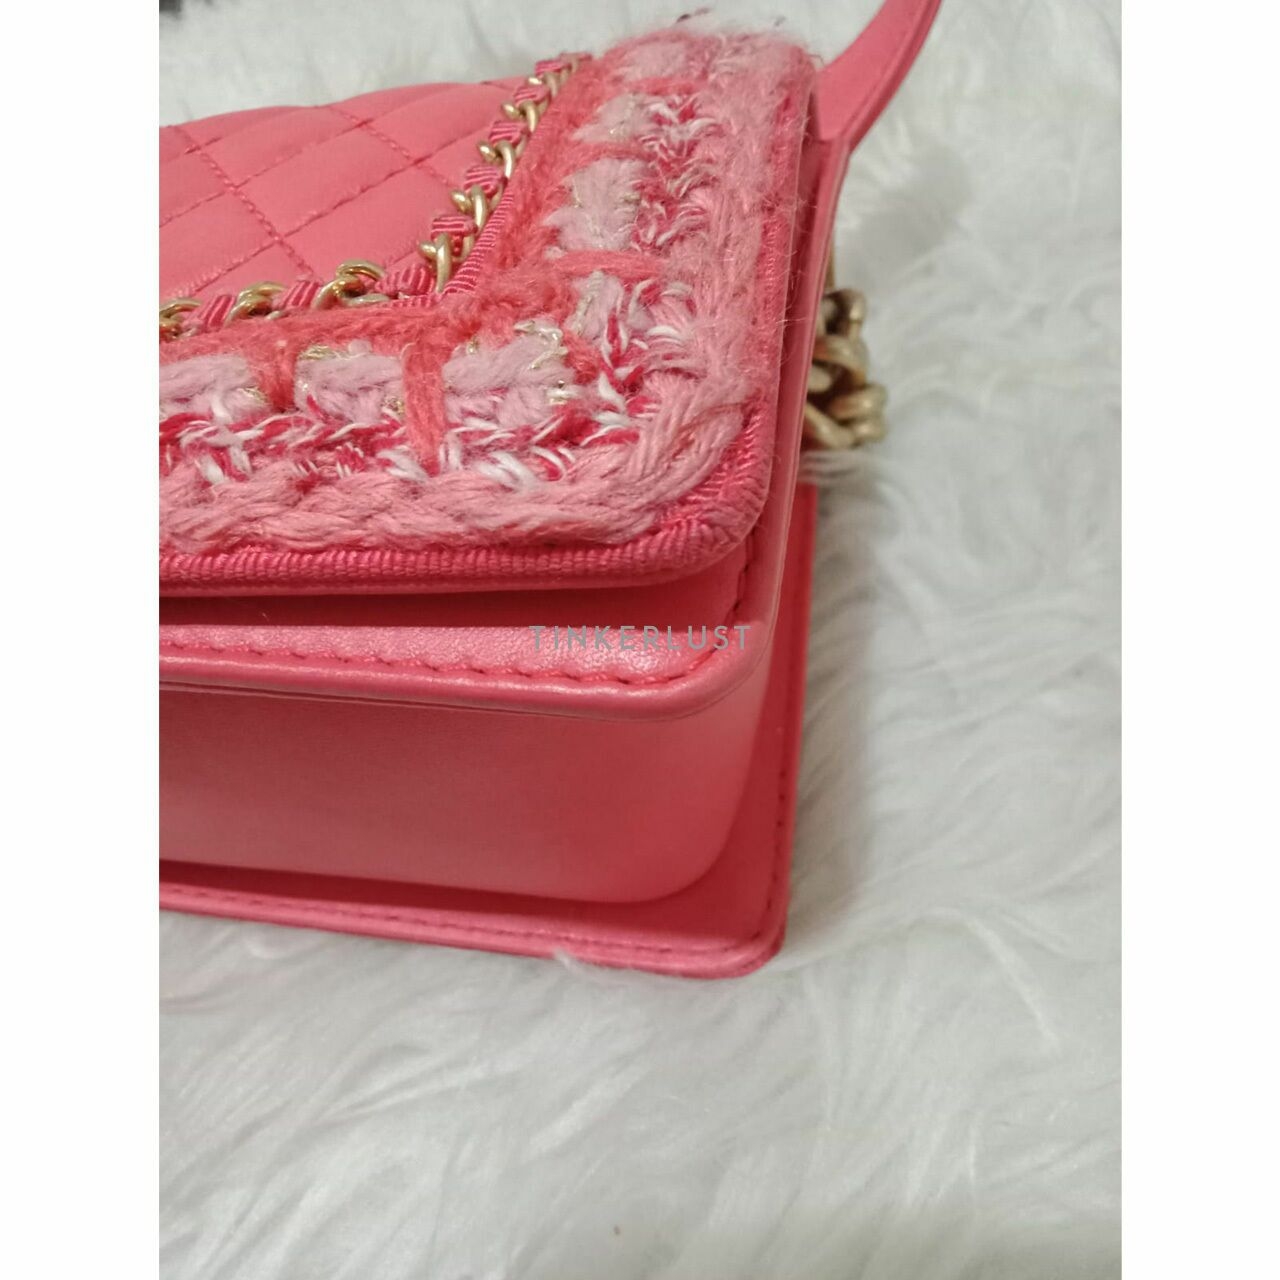 Chanel Boy Small Coral Pink Tweed #23 GHW Sling Bag